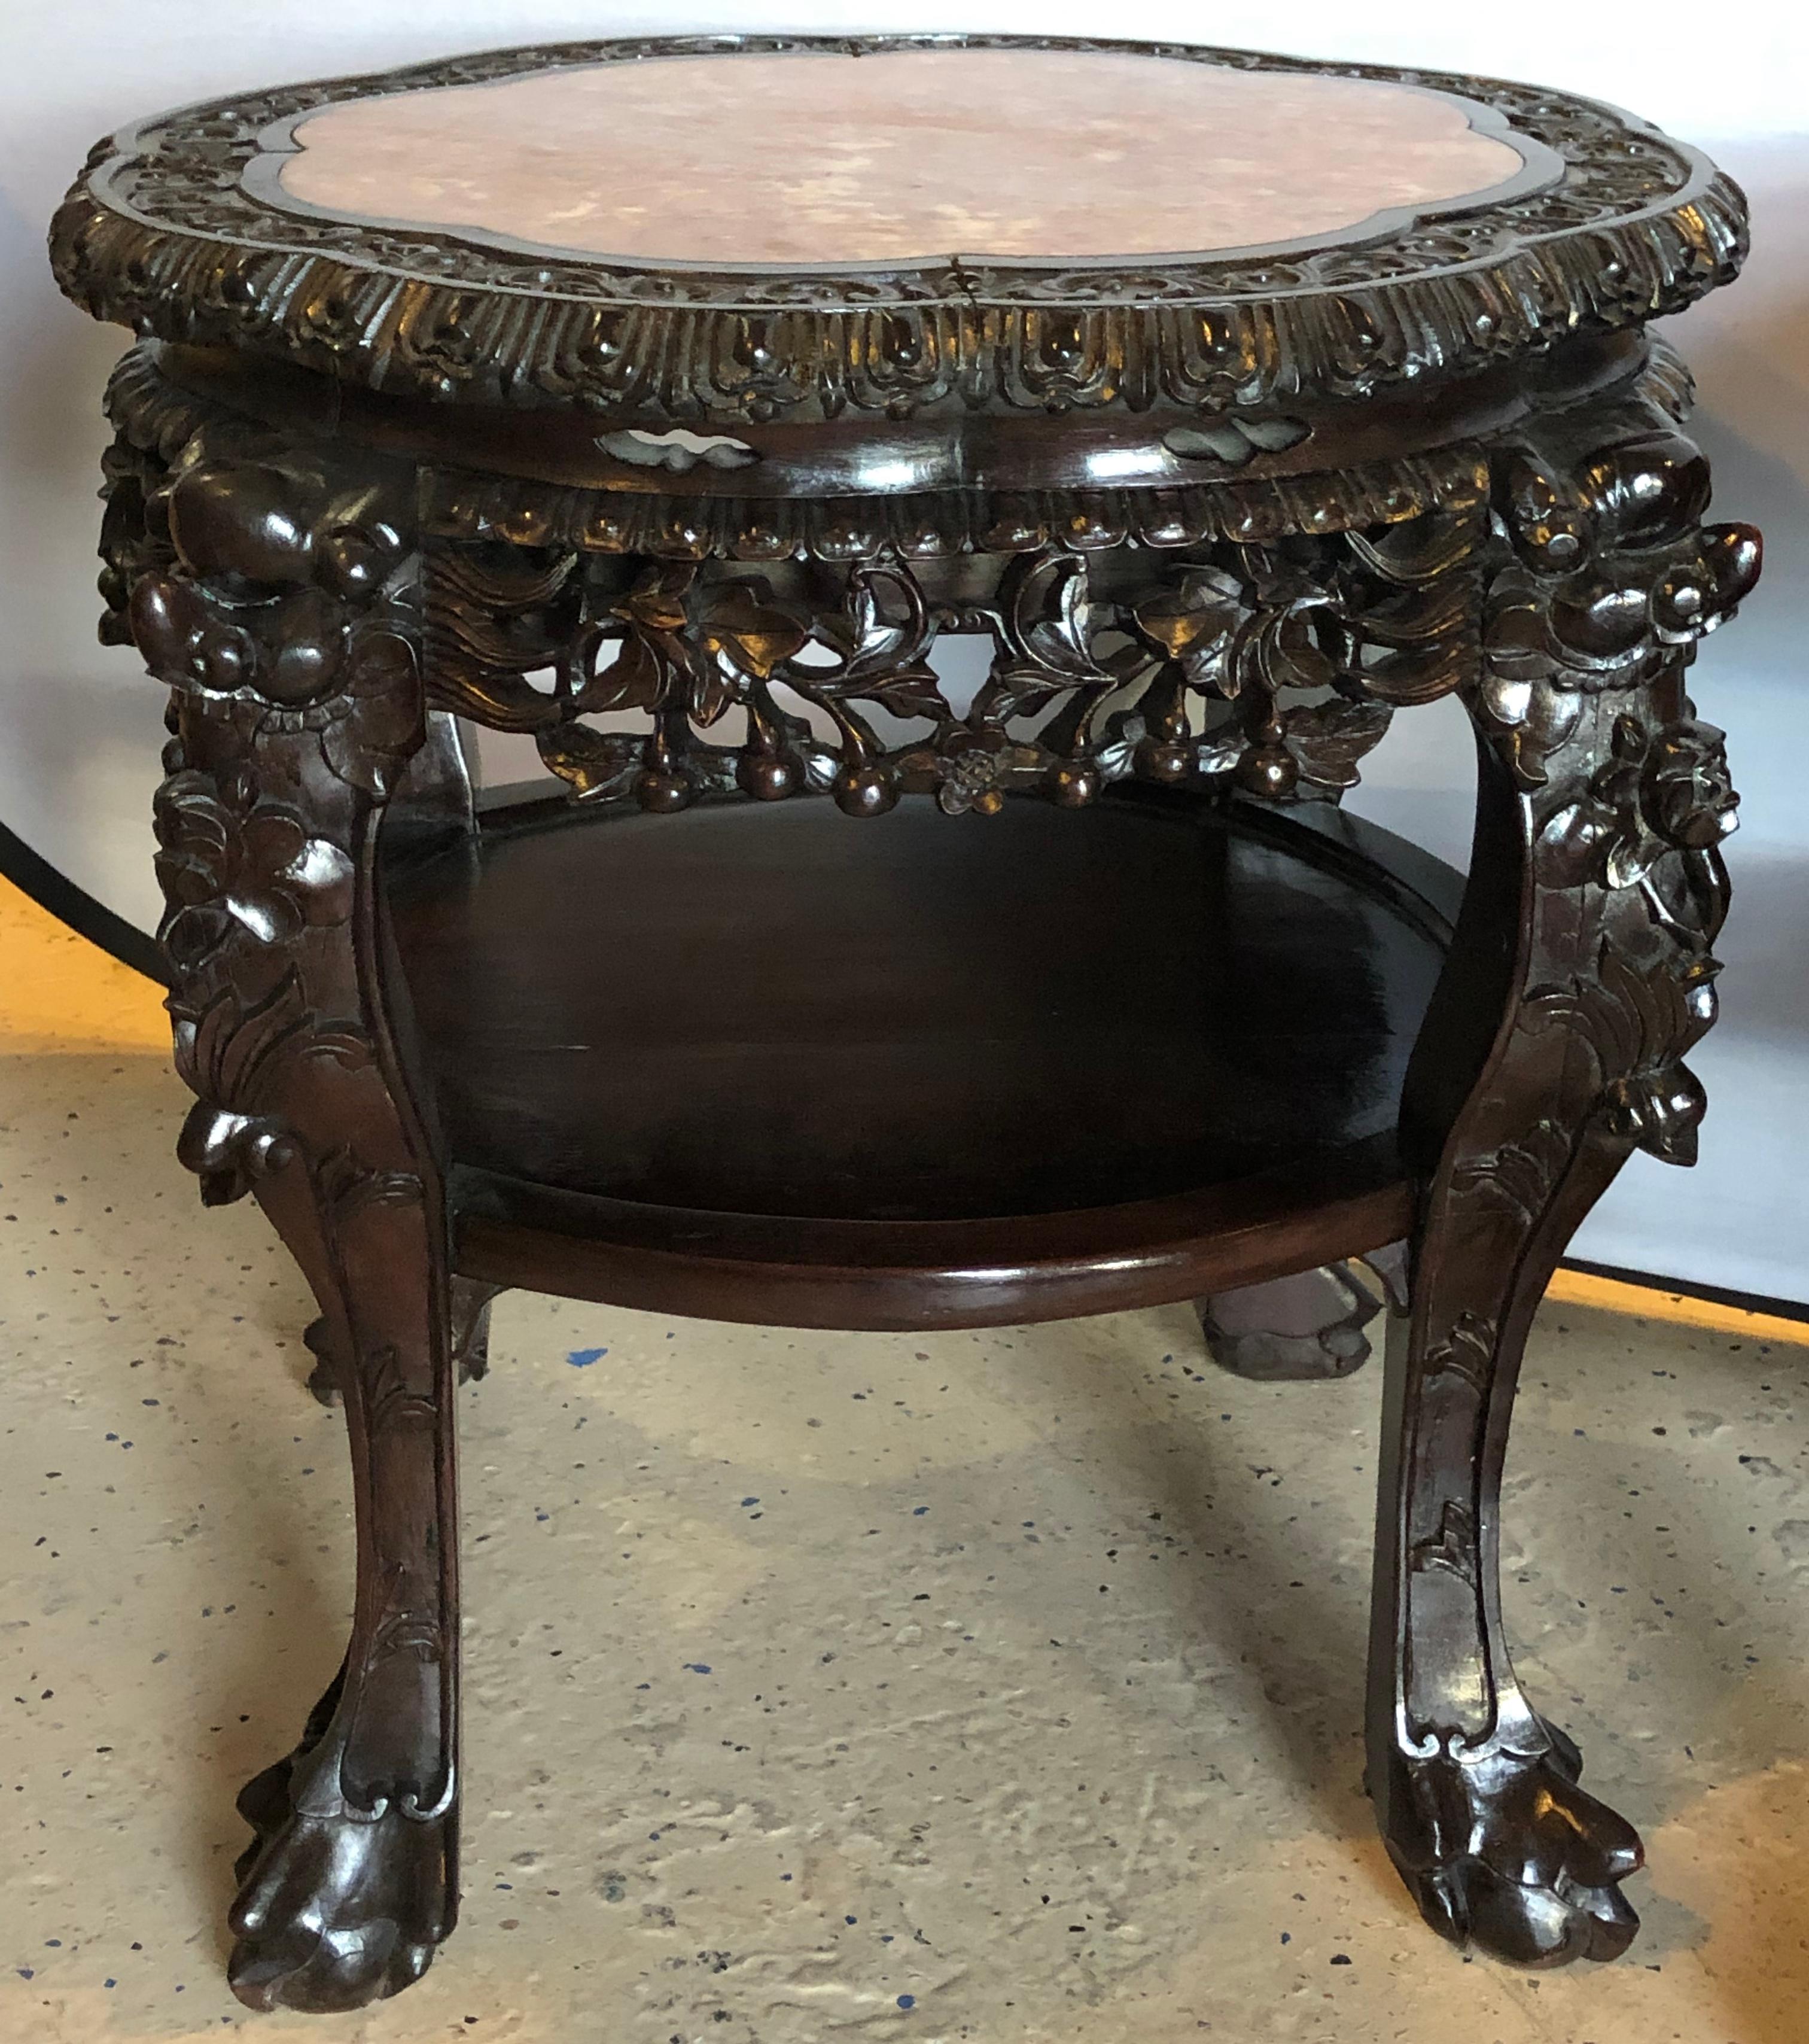 Pair of Chinese 19th century teak-wood marble-top stands or end tables. Each marble top stand having a carved teak stand with a lower shelf. The marbles having been professionally repaired and the marbles and cases having been polished.